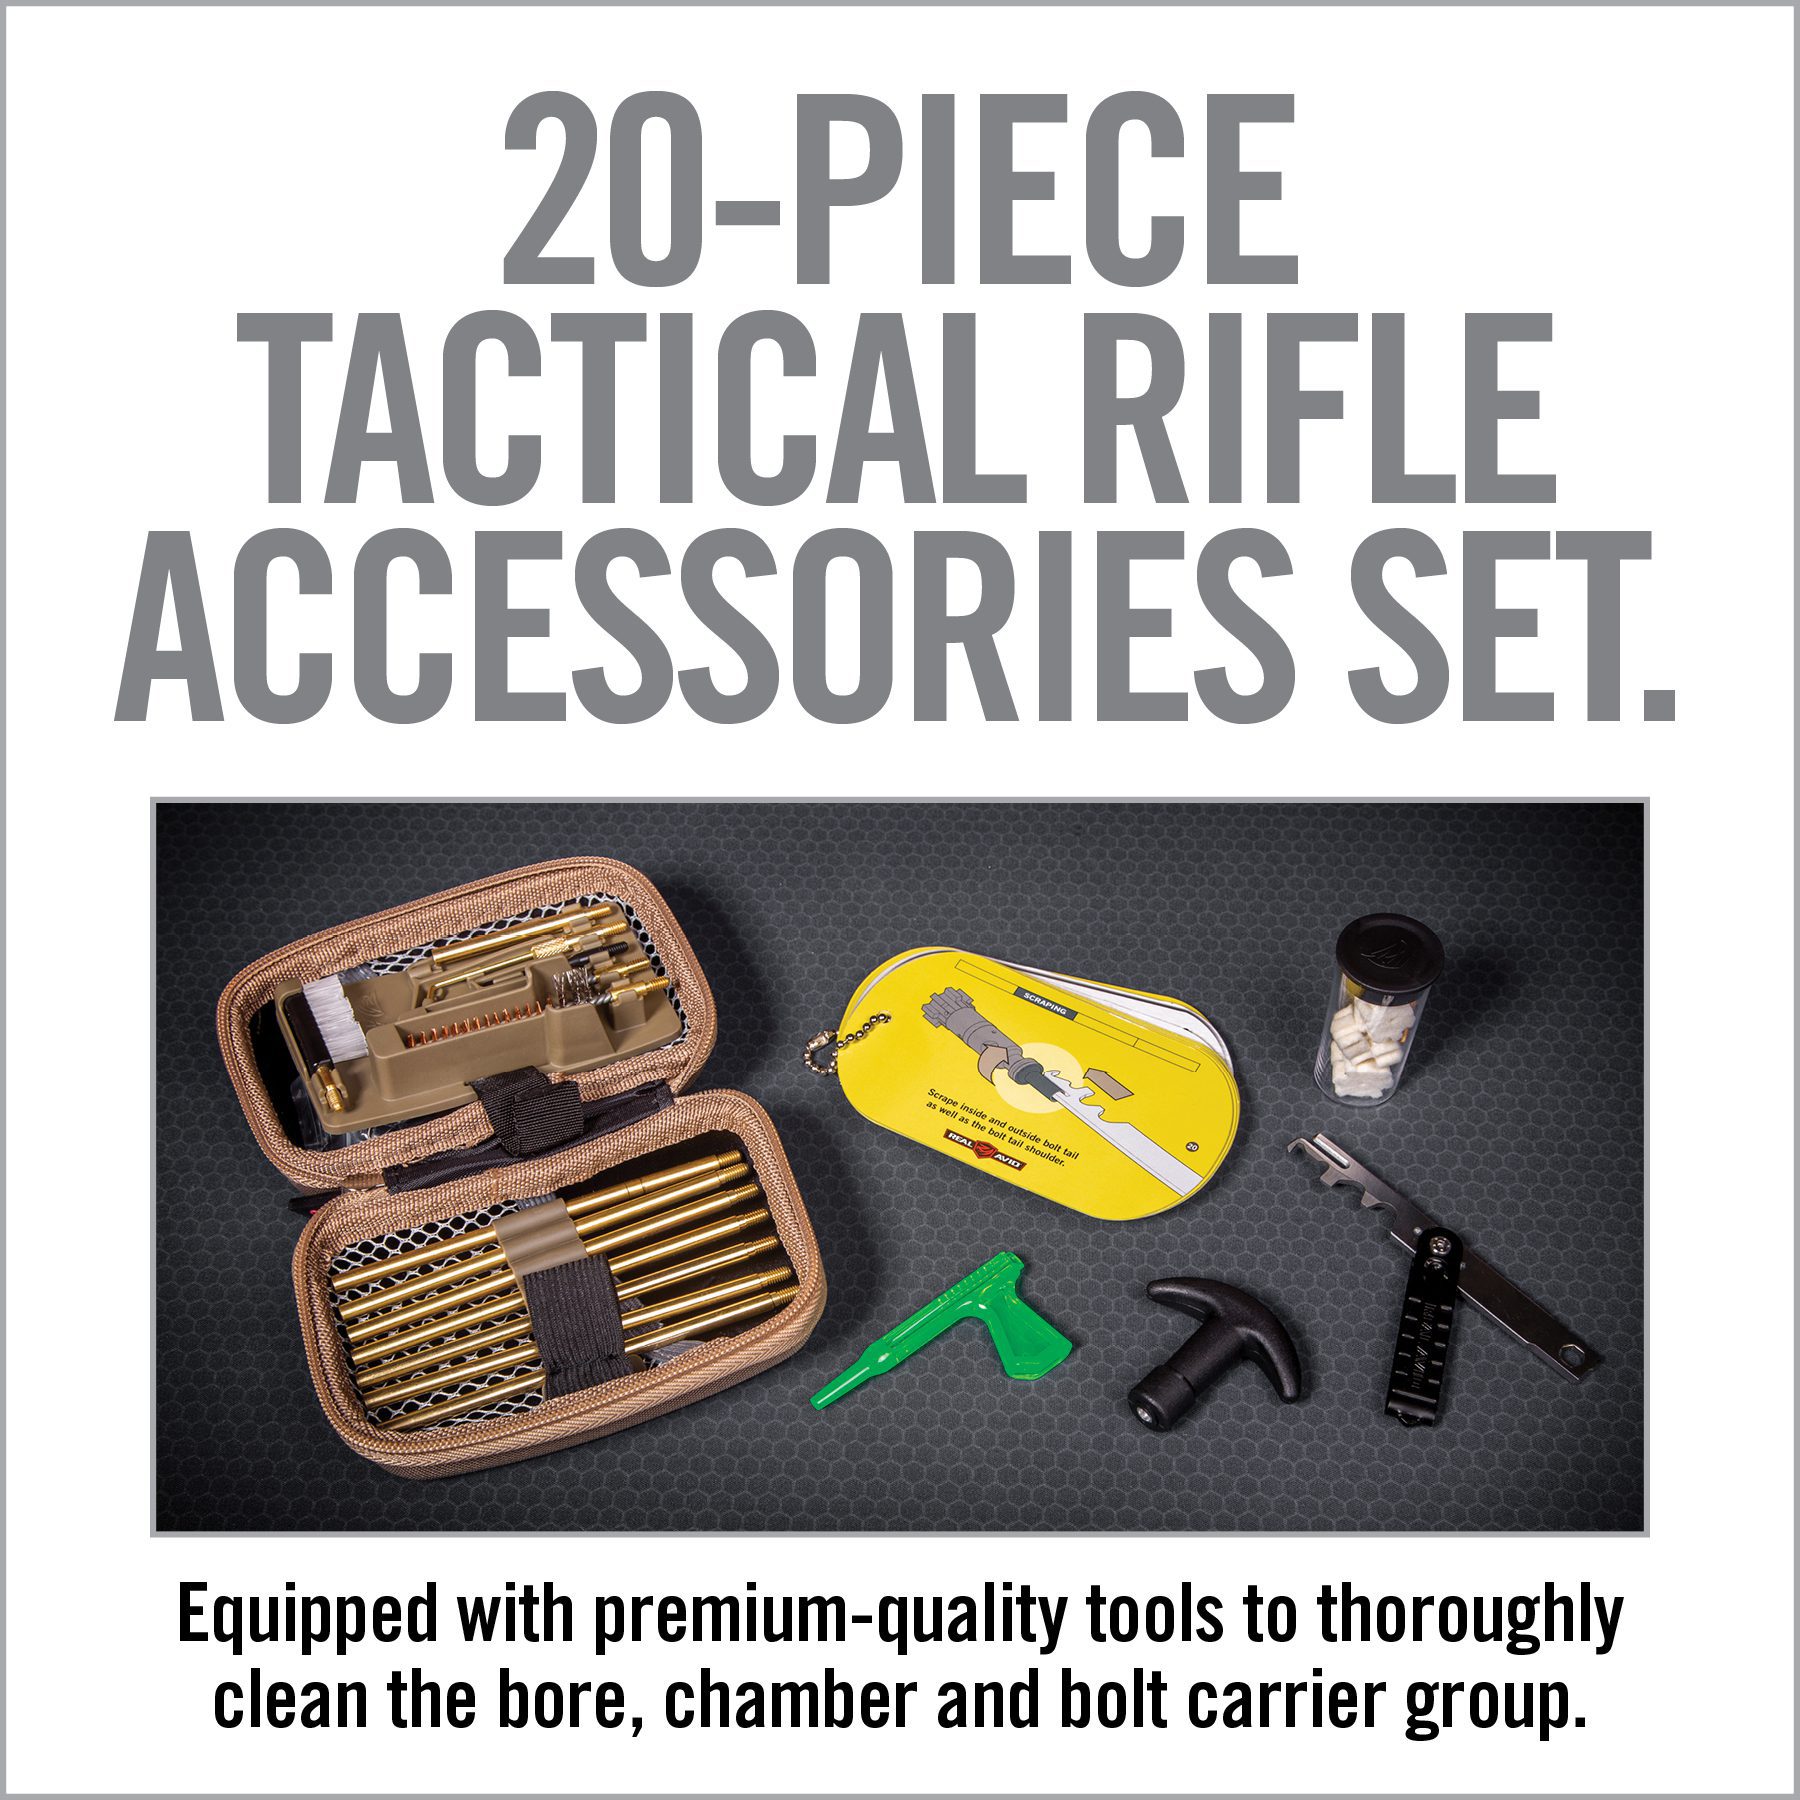 the 20 piece tactical rifle accessories set